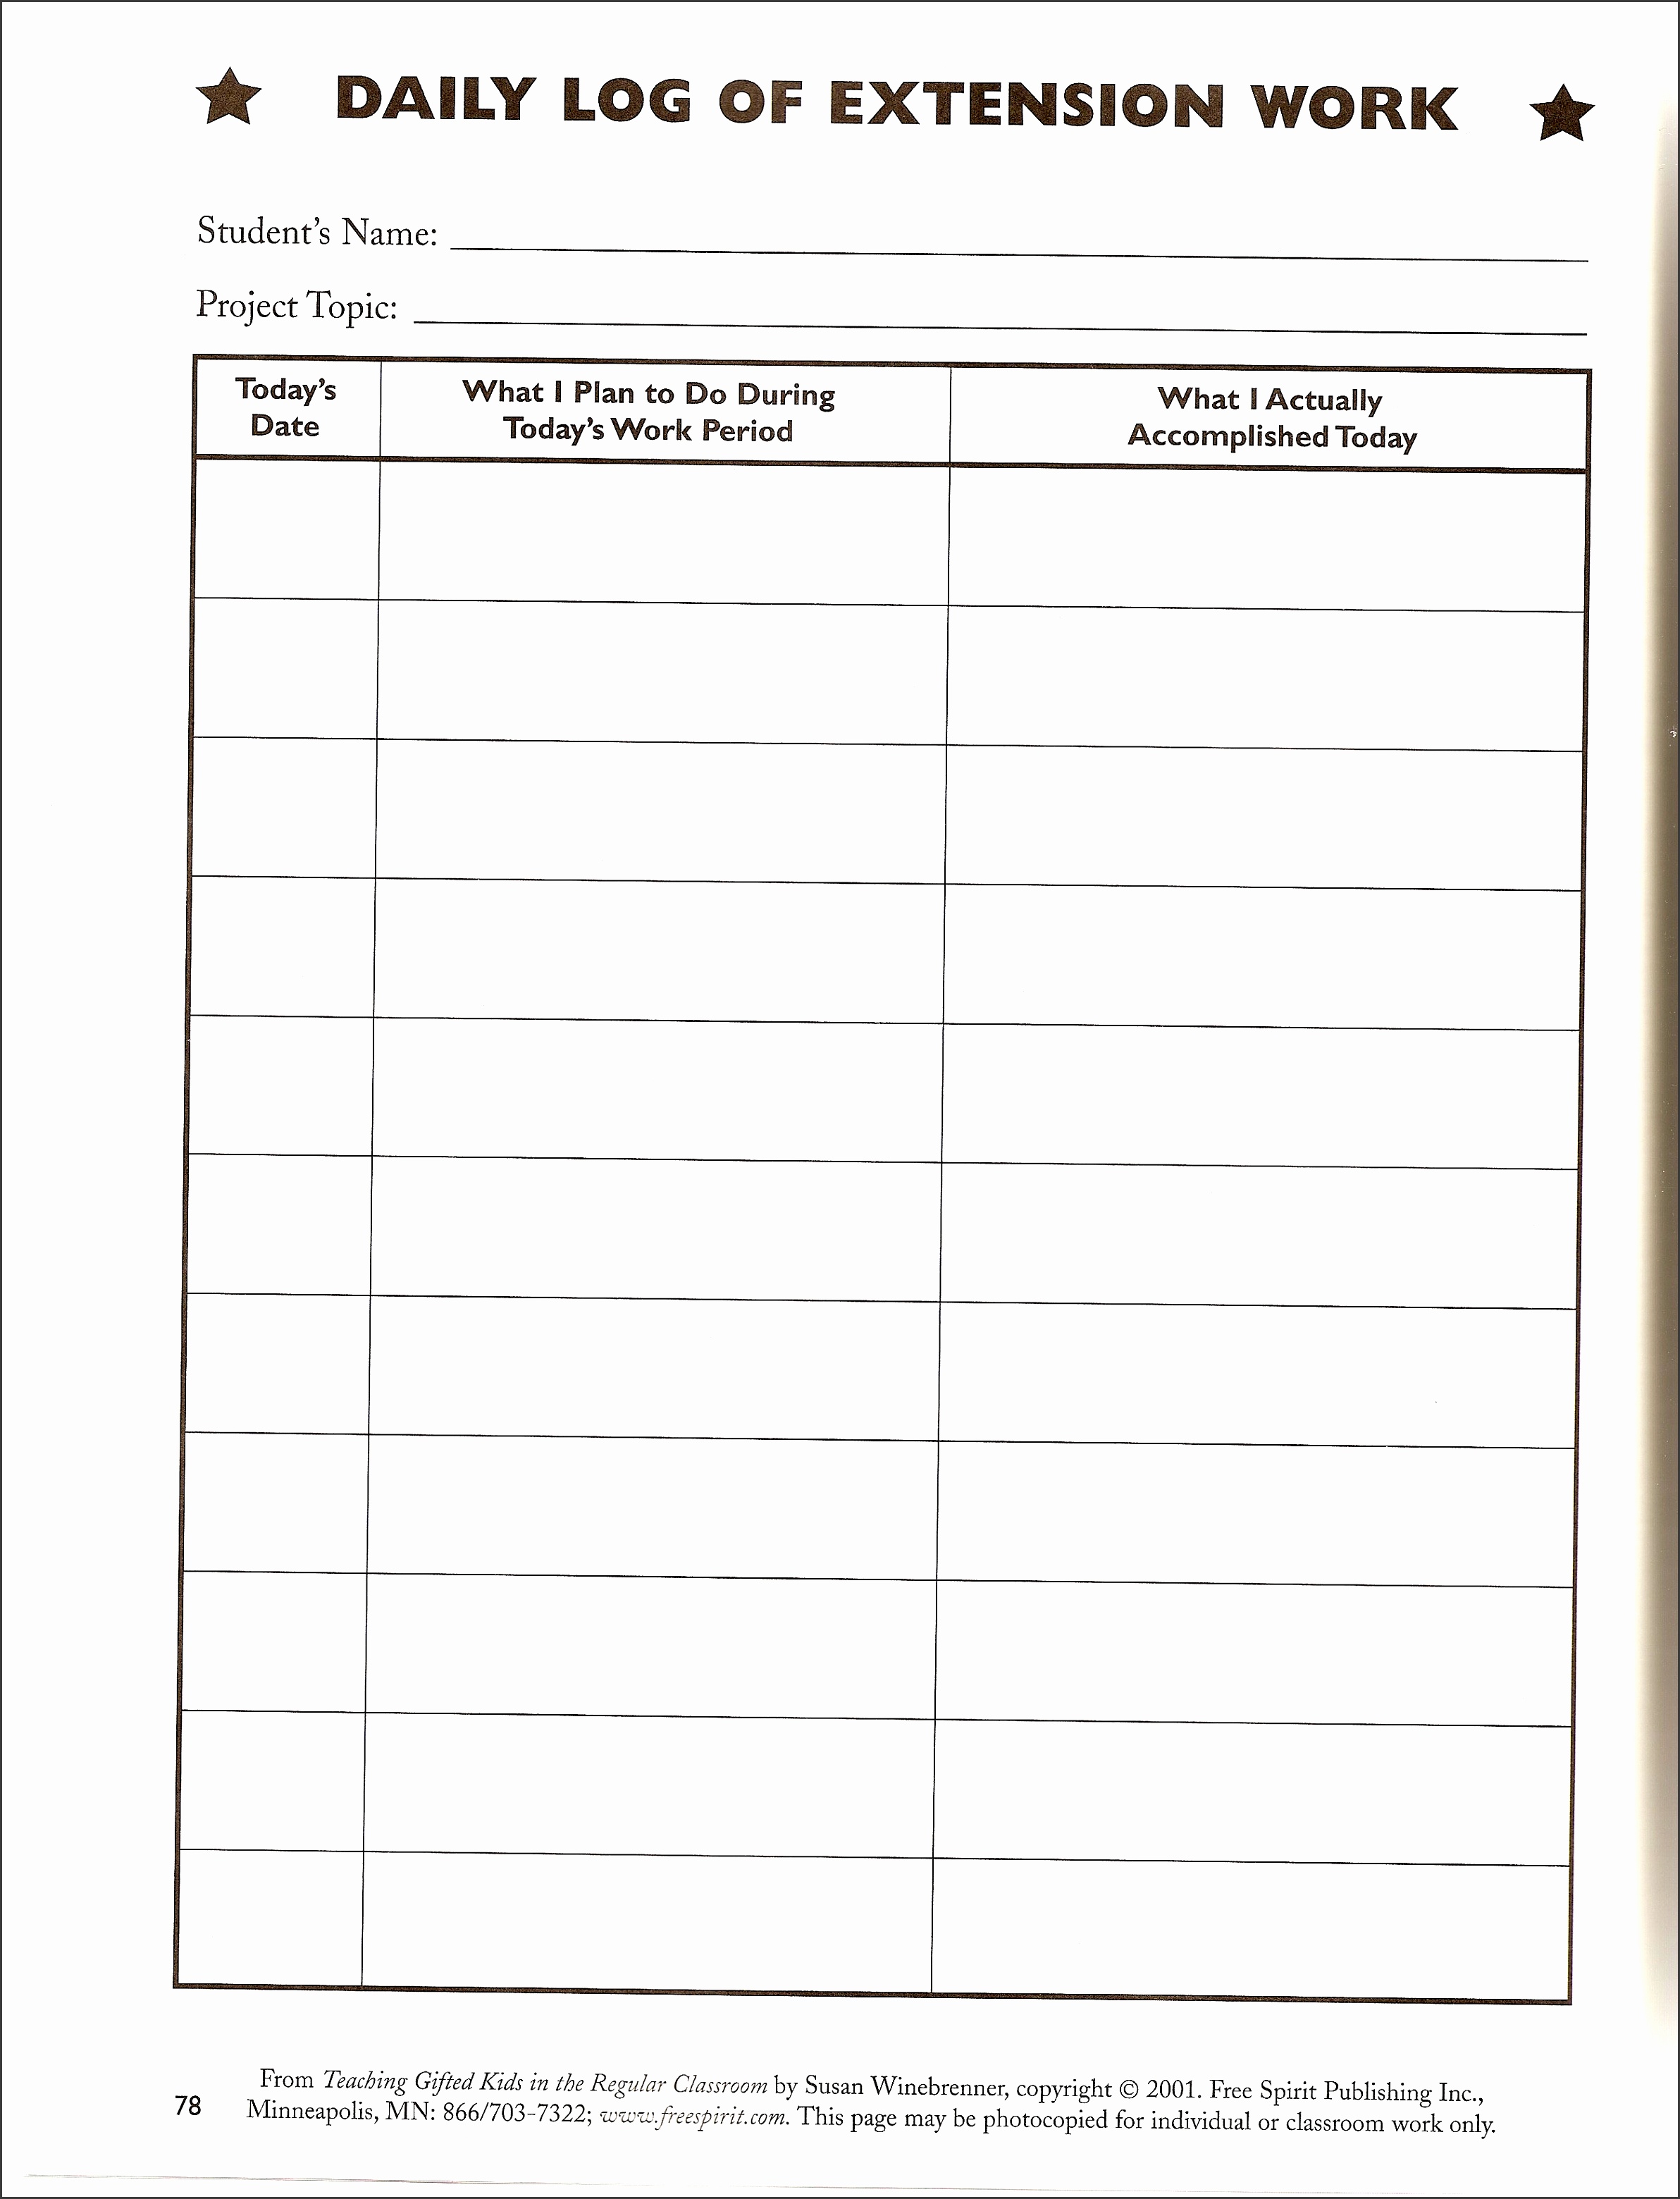 work-log-template-20-free-word-excel-pdf-documents-download